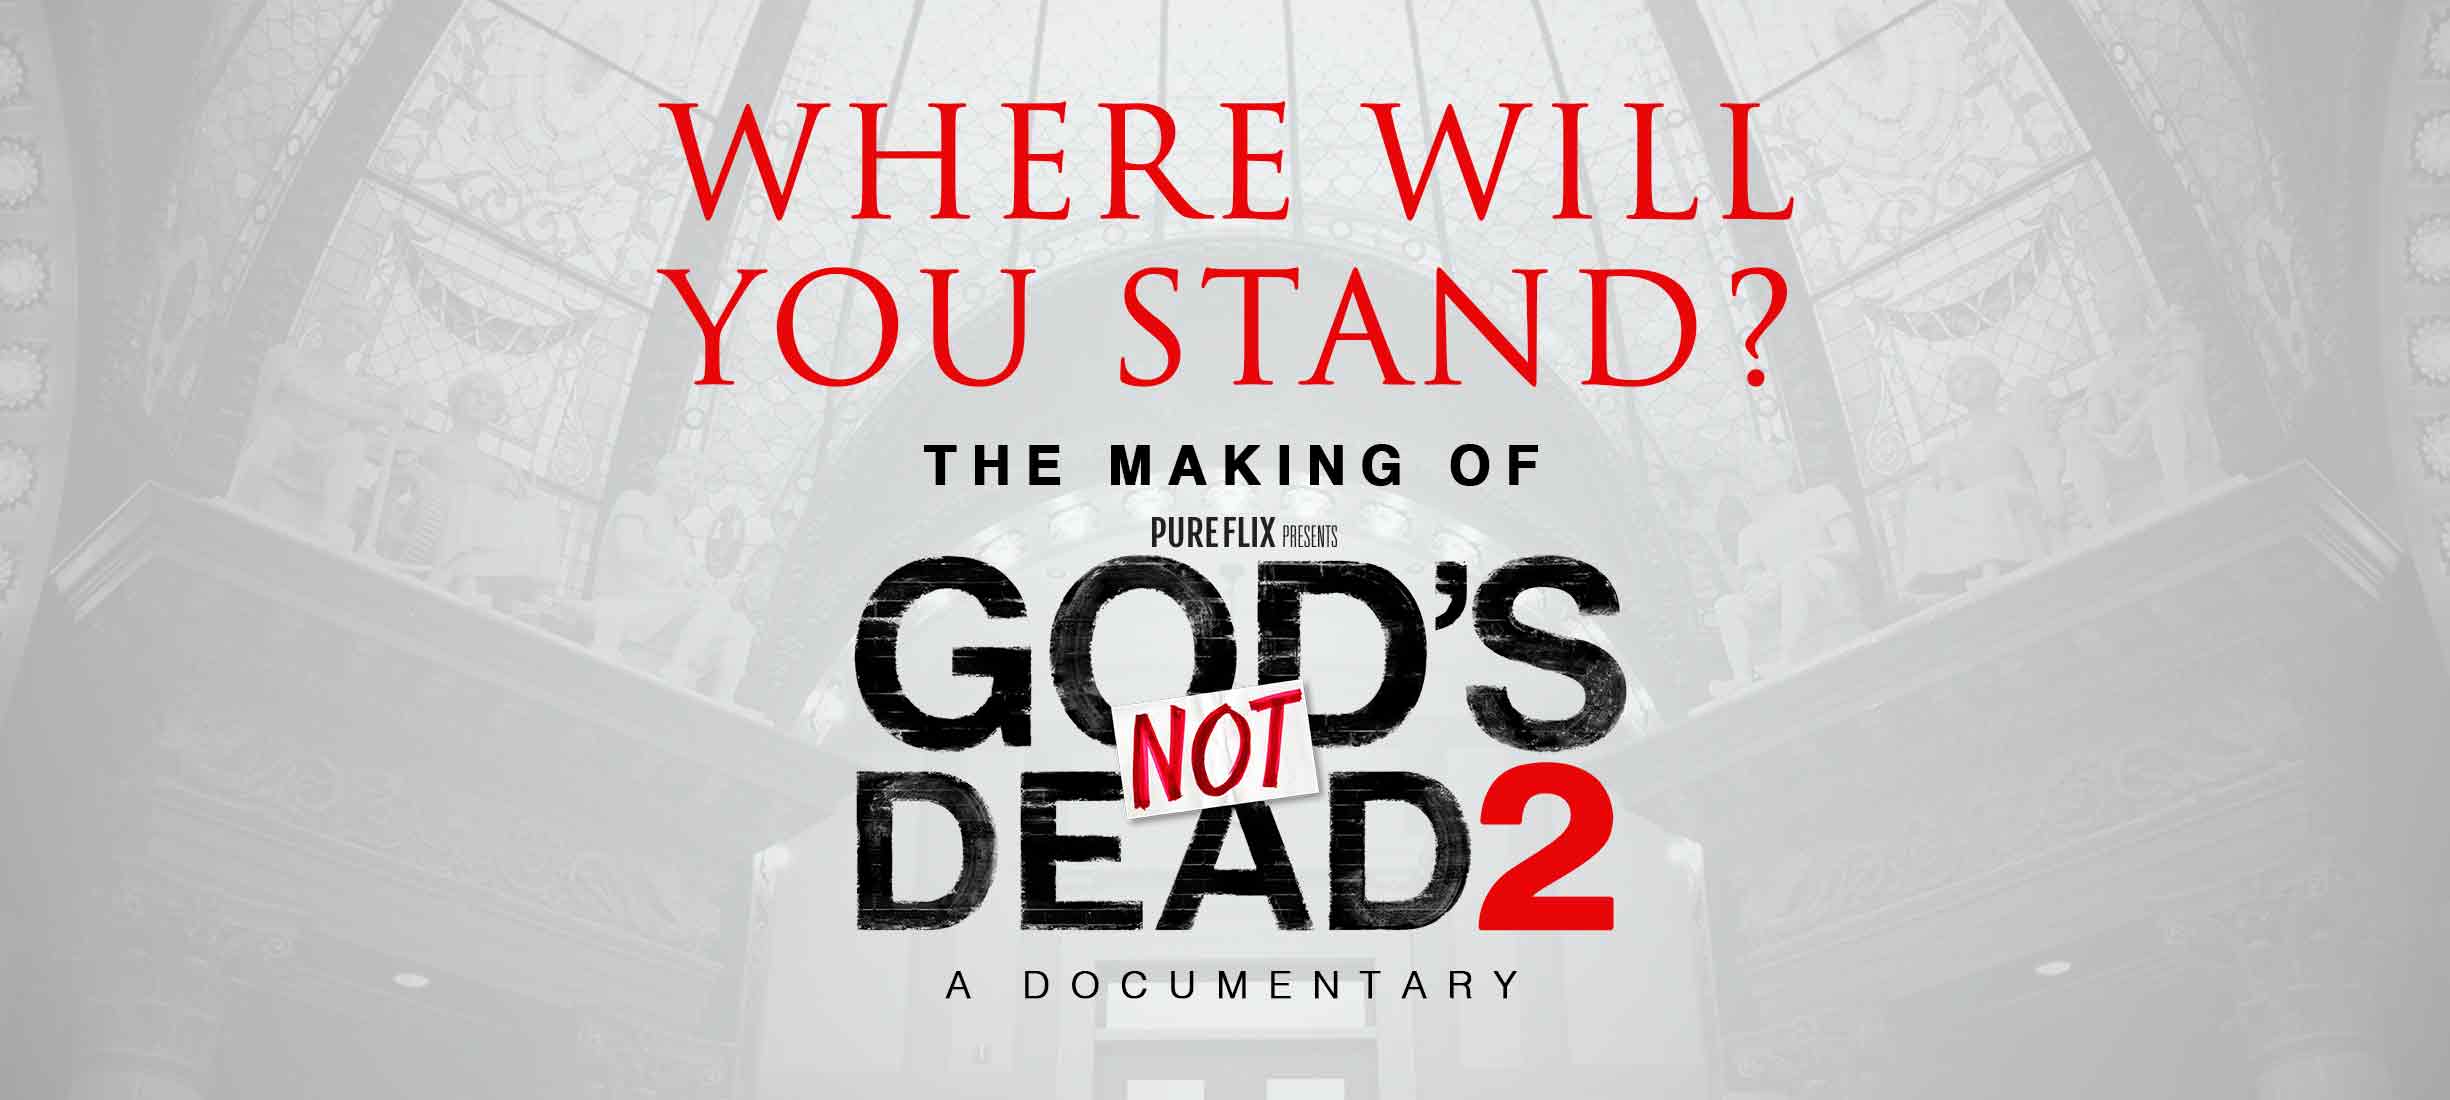 watch gods not dead 2 for free